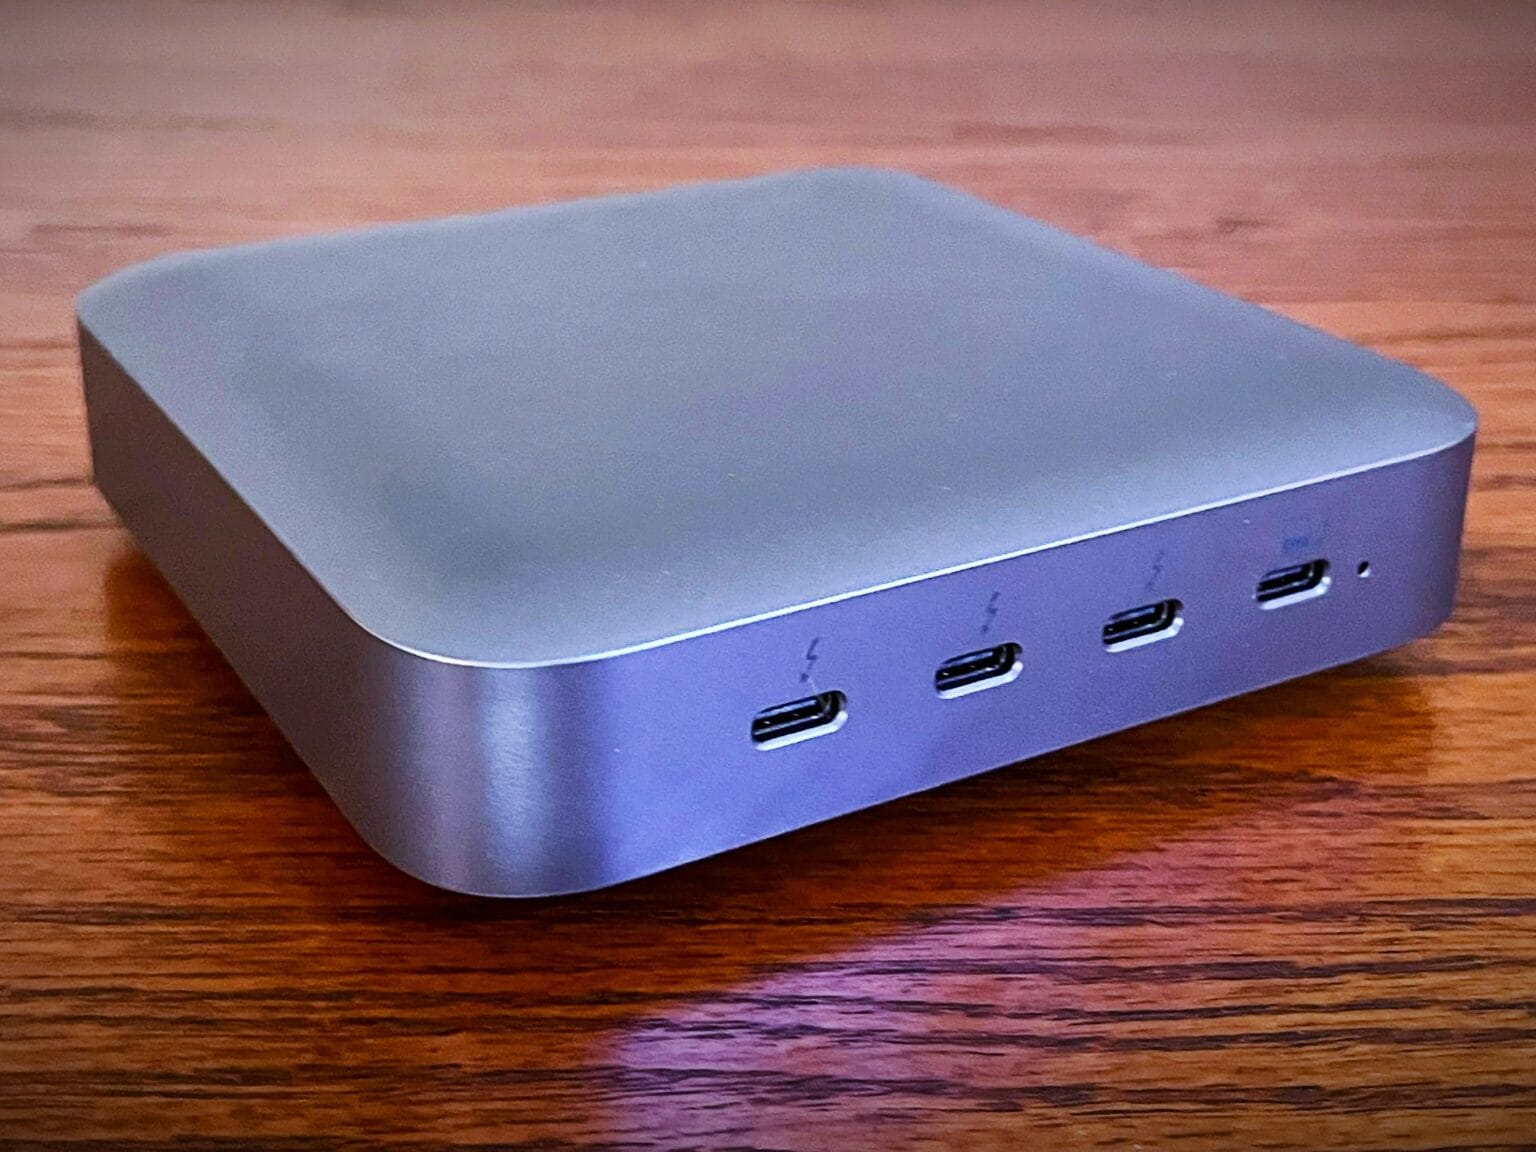 Sanho HyperDrive Thunderbolt 4 Power Hub review: You can never have too many high-speed data ports, and the HyperDrive Thunderbolt 4 Power Hub adds three more to your Mac or iPad Pro.